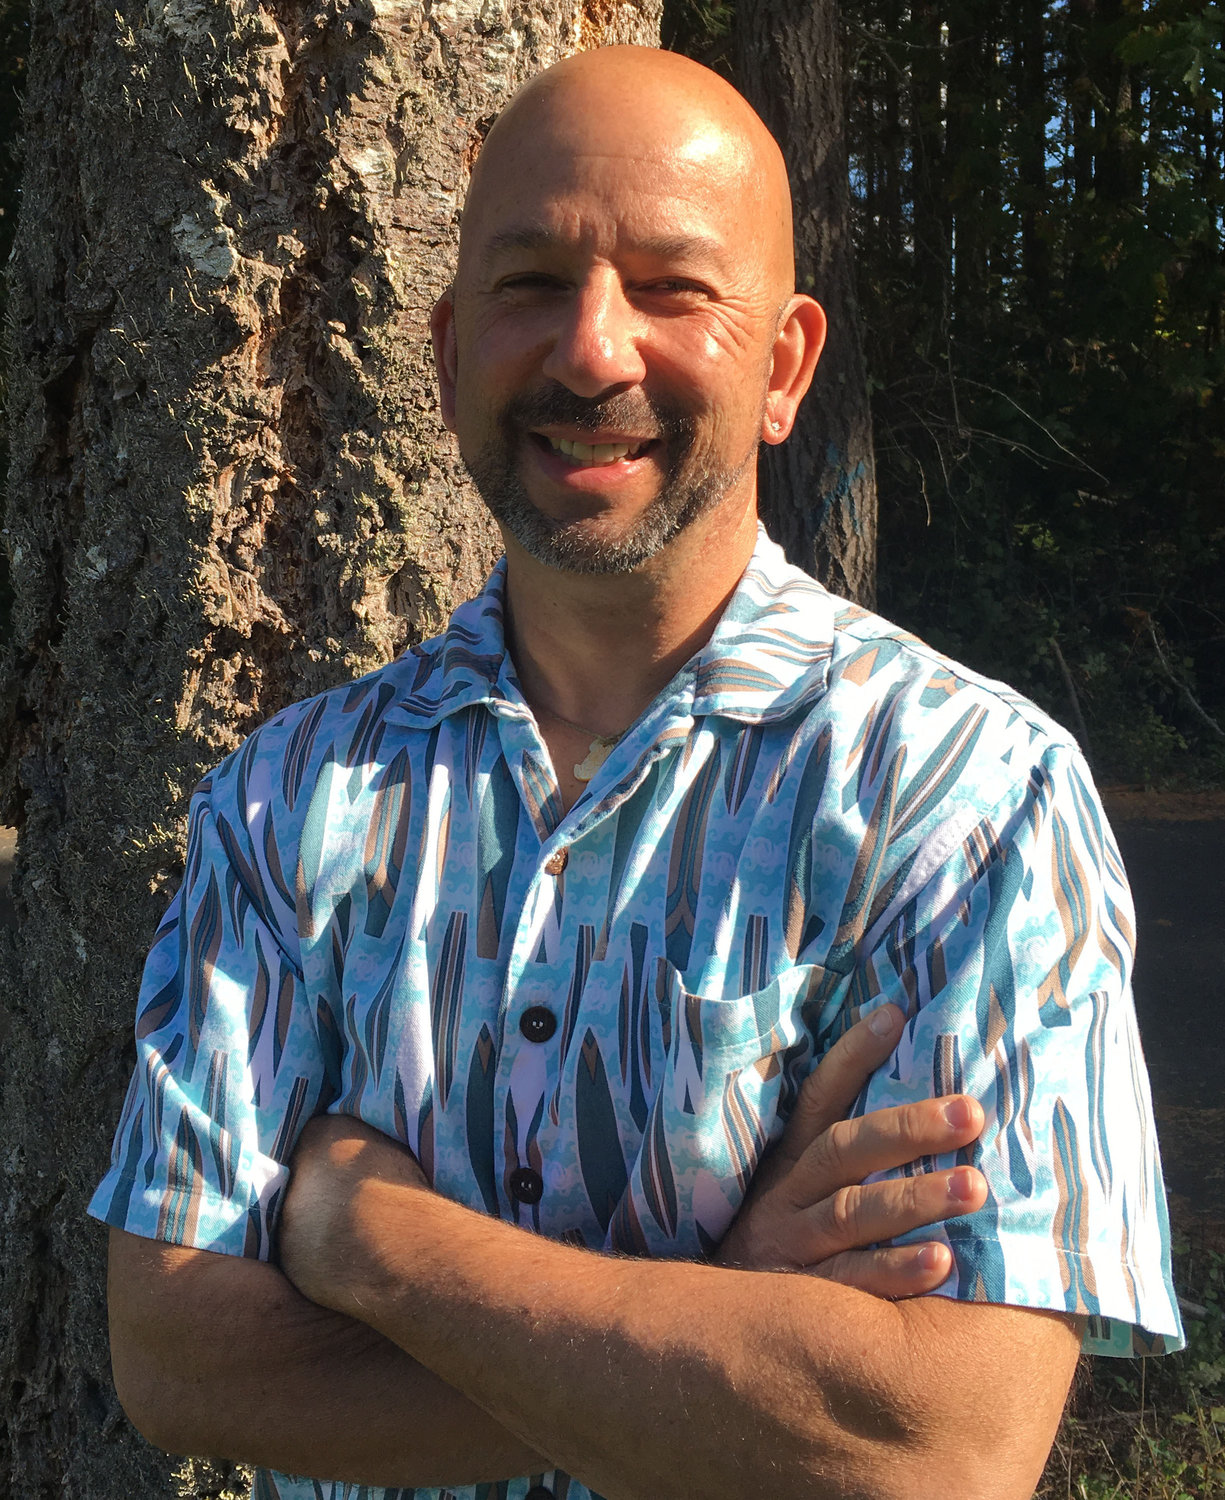 David Troutt is the director of Nisqually Natural Resources.